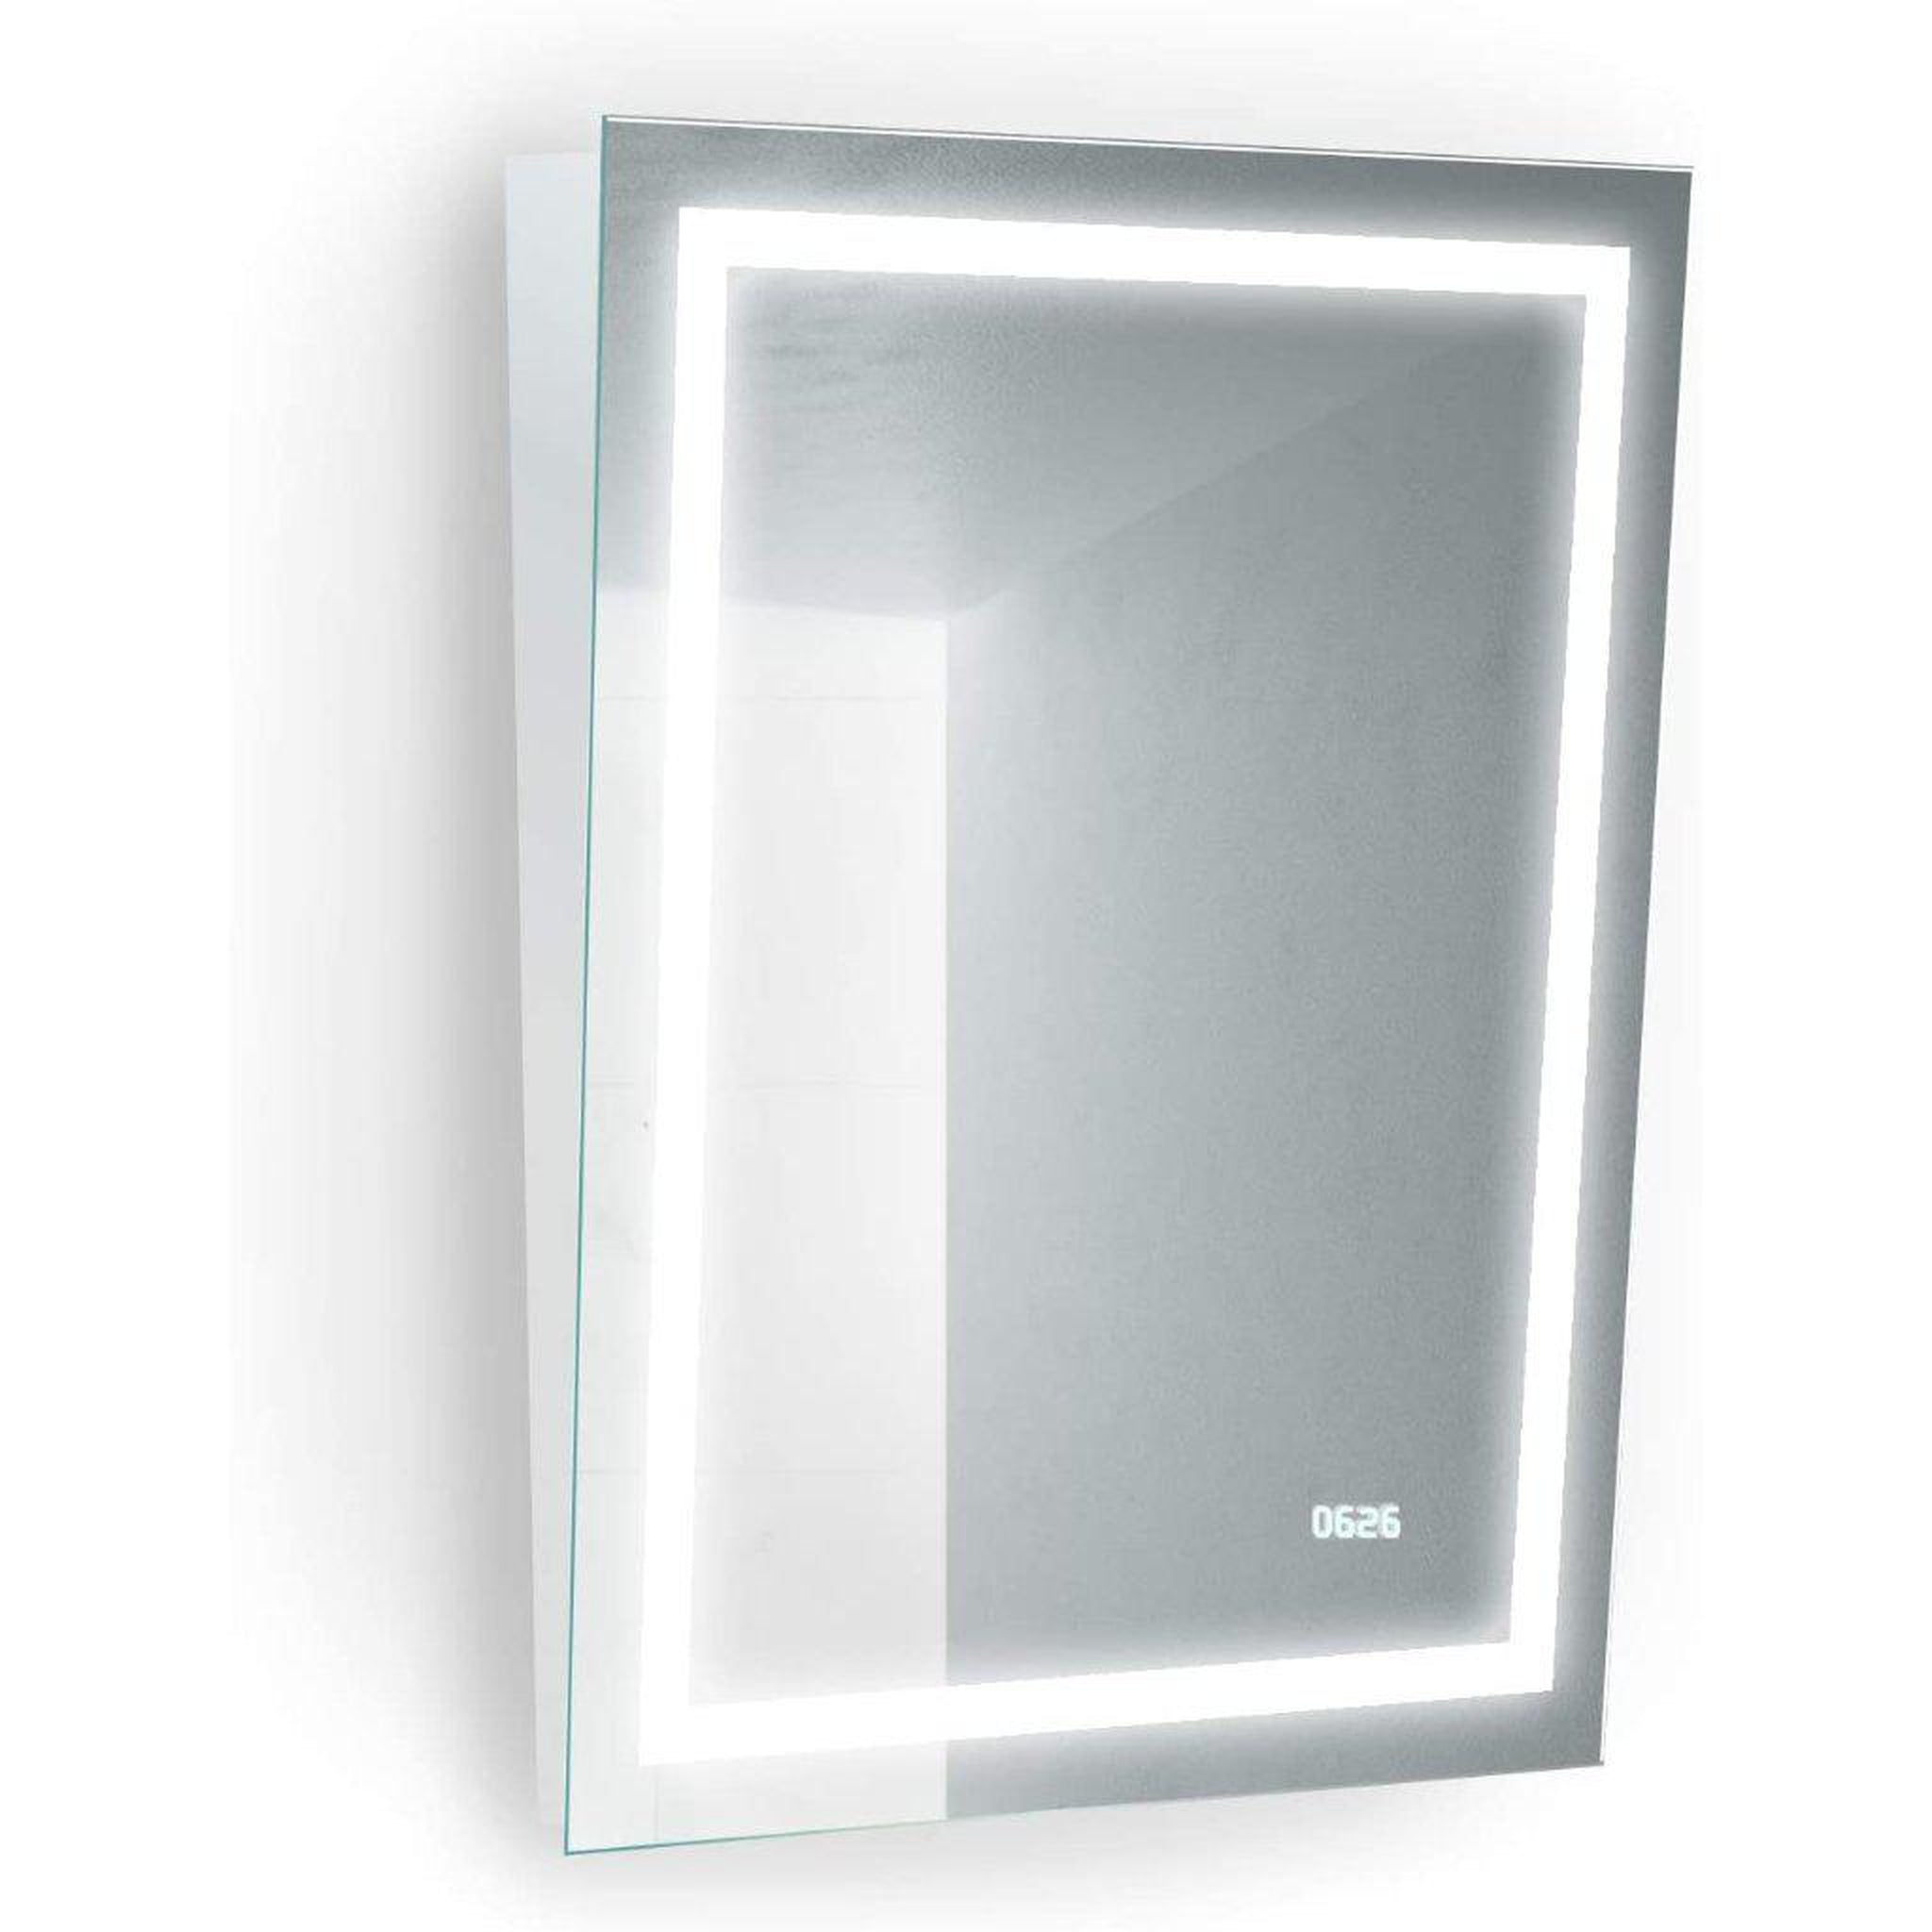 Krugg Reflections, Krugg Reflections Icon 24” x 32” 4000K Rectangular Tilted Wall-Mounted Illuminated Silver Backed LED Mirror With Built-in Defogger and Touch Sensor On/Off Built-in Dimmer